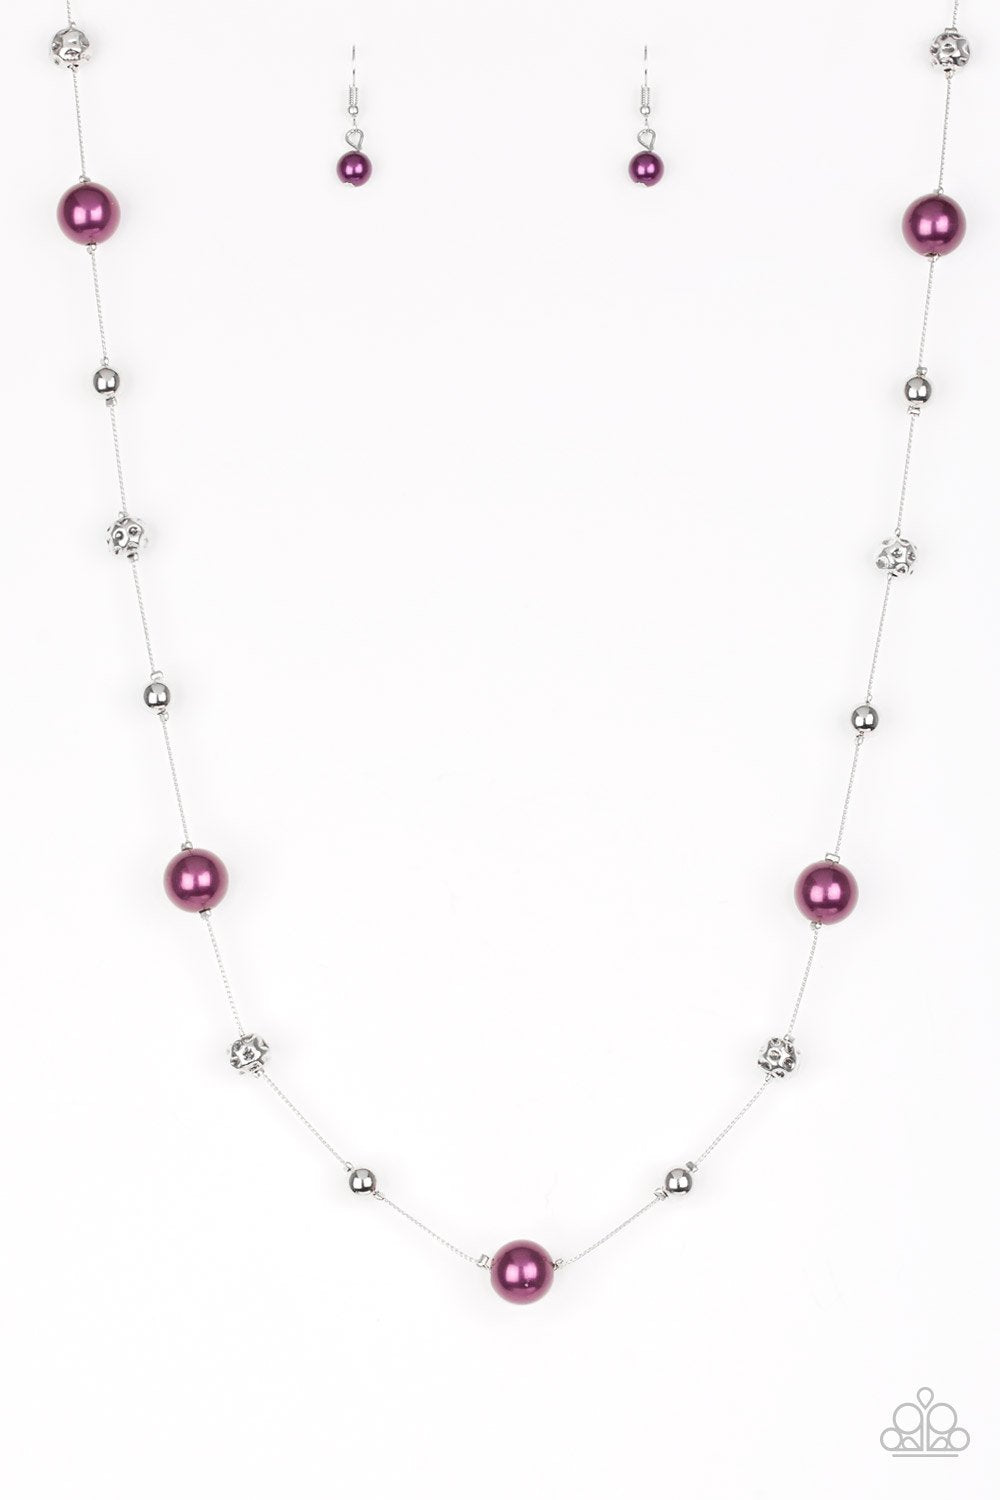 Paparazzi Necklace ~ Eloquently Eloquent - Purple